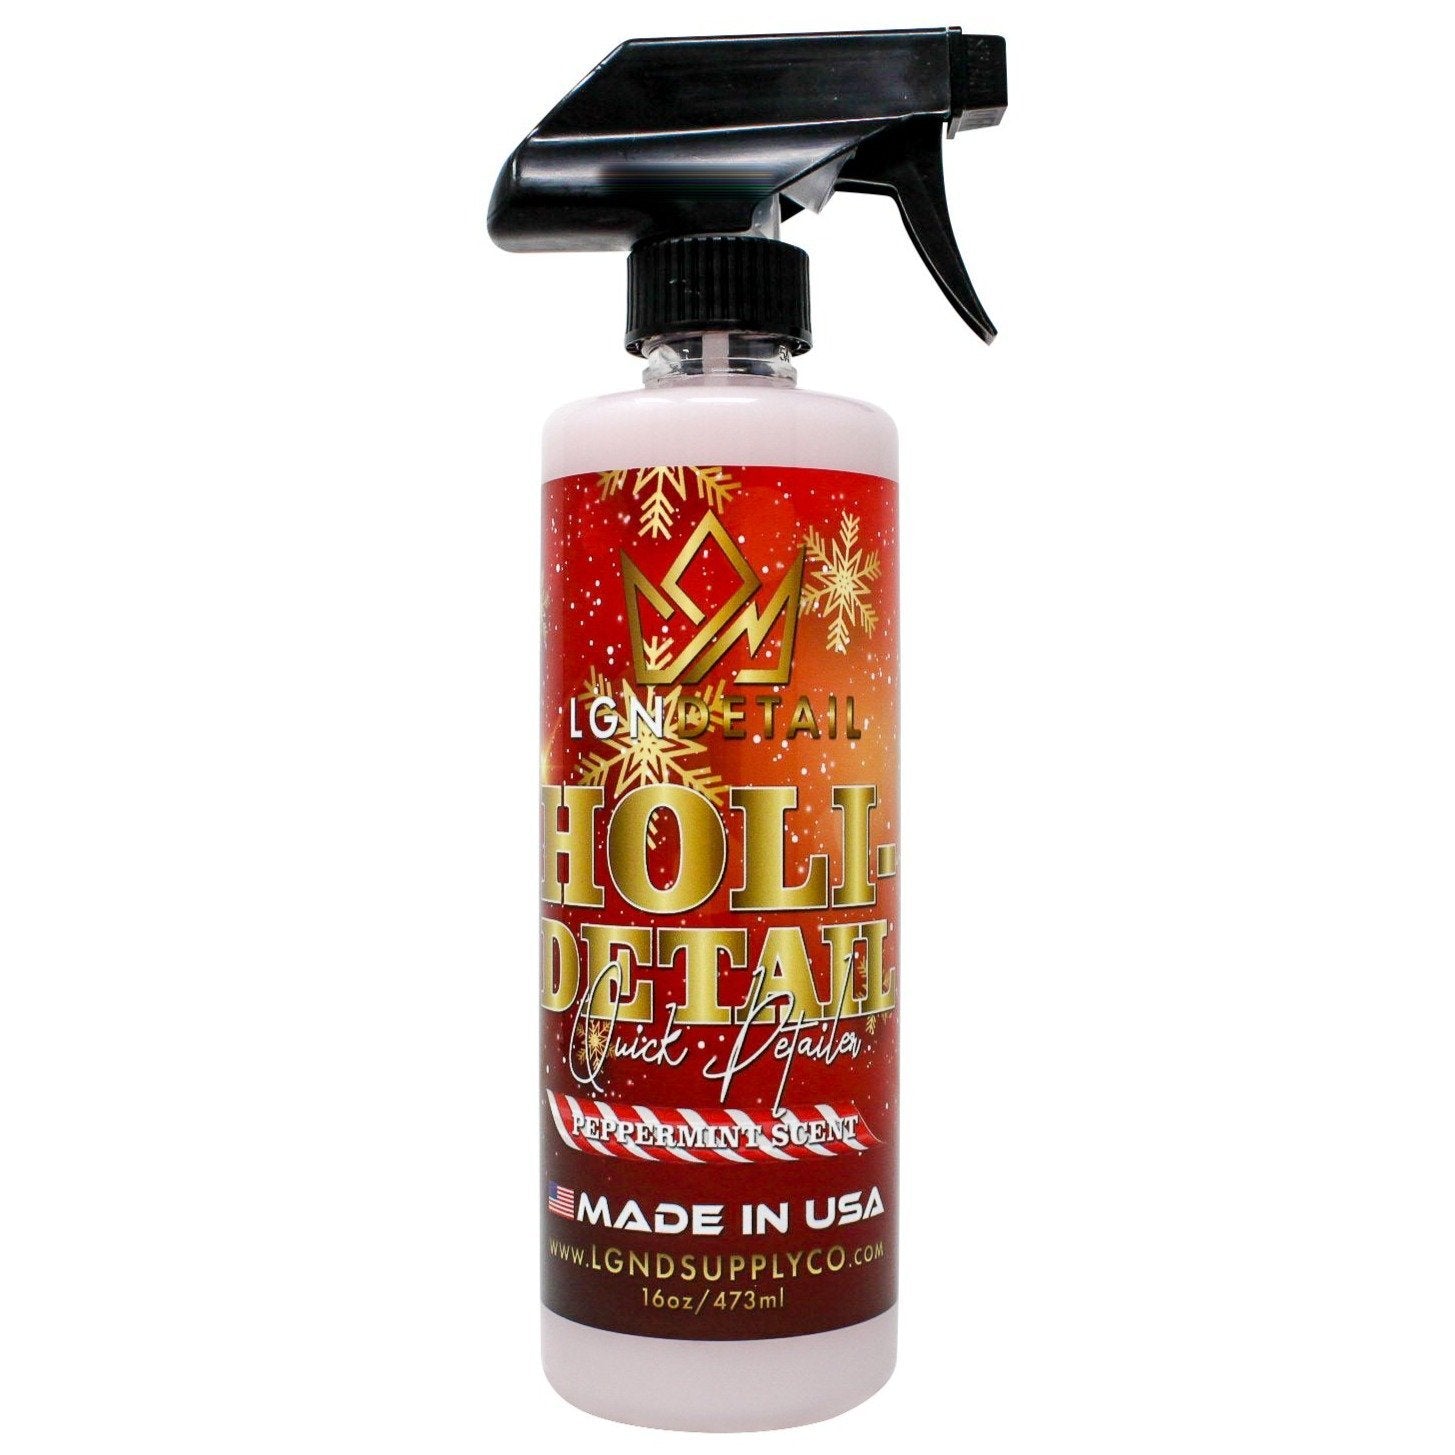 Limited Edition Holidetail Quick Detailer - LGND SUPPLY CO.